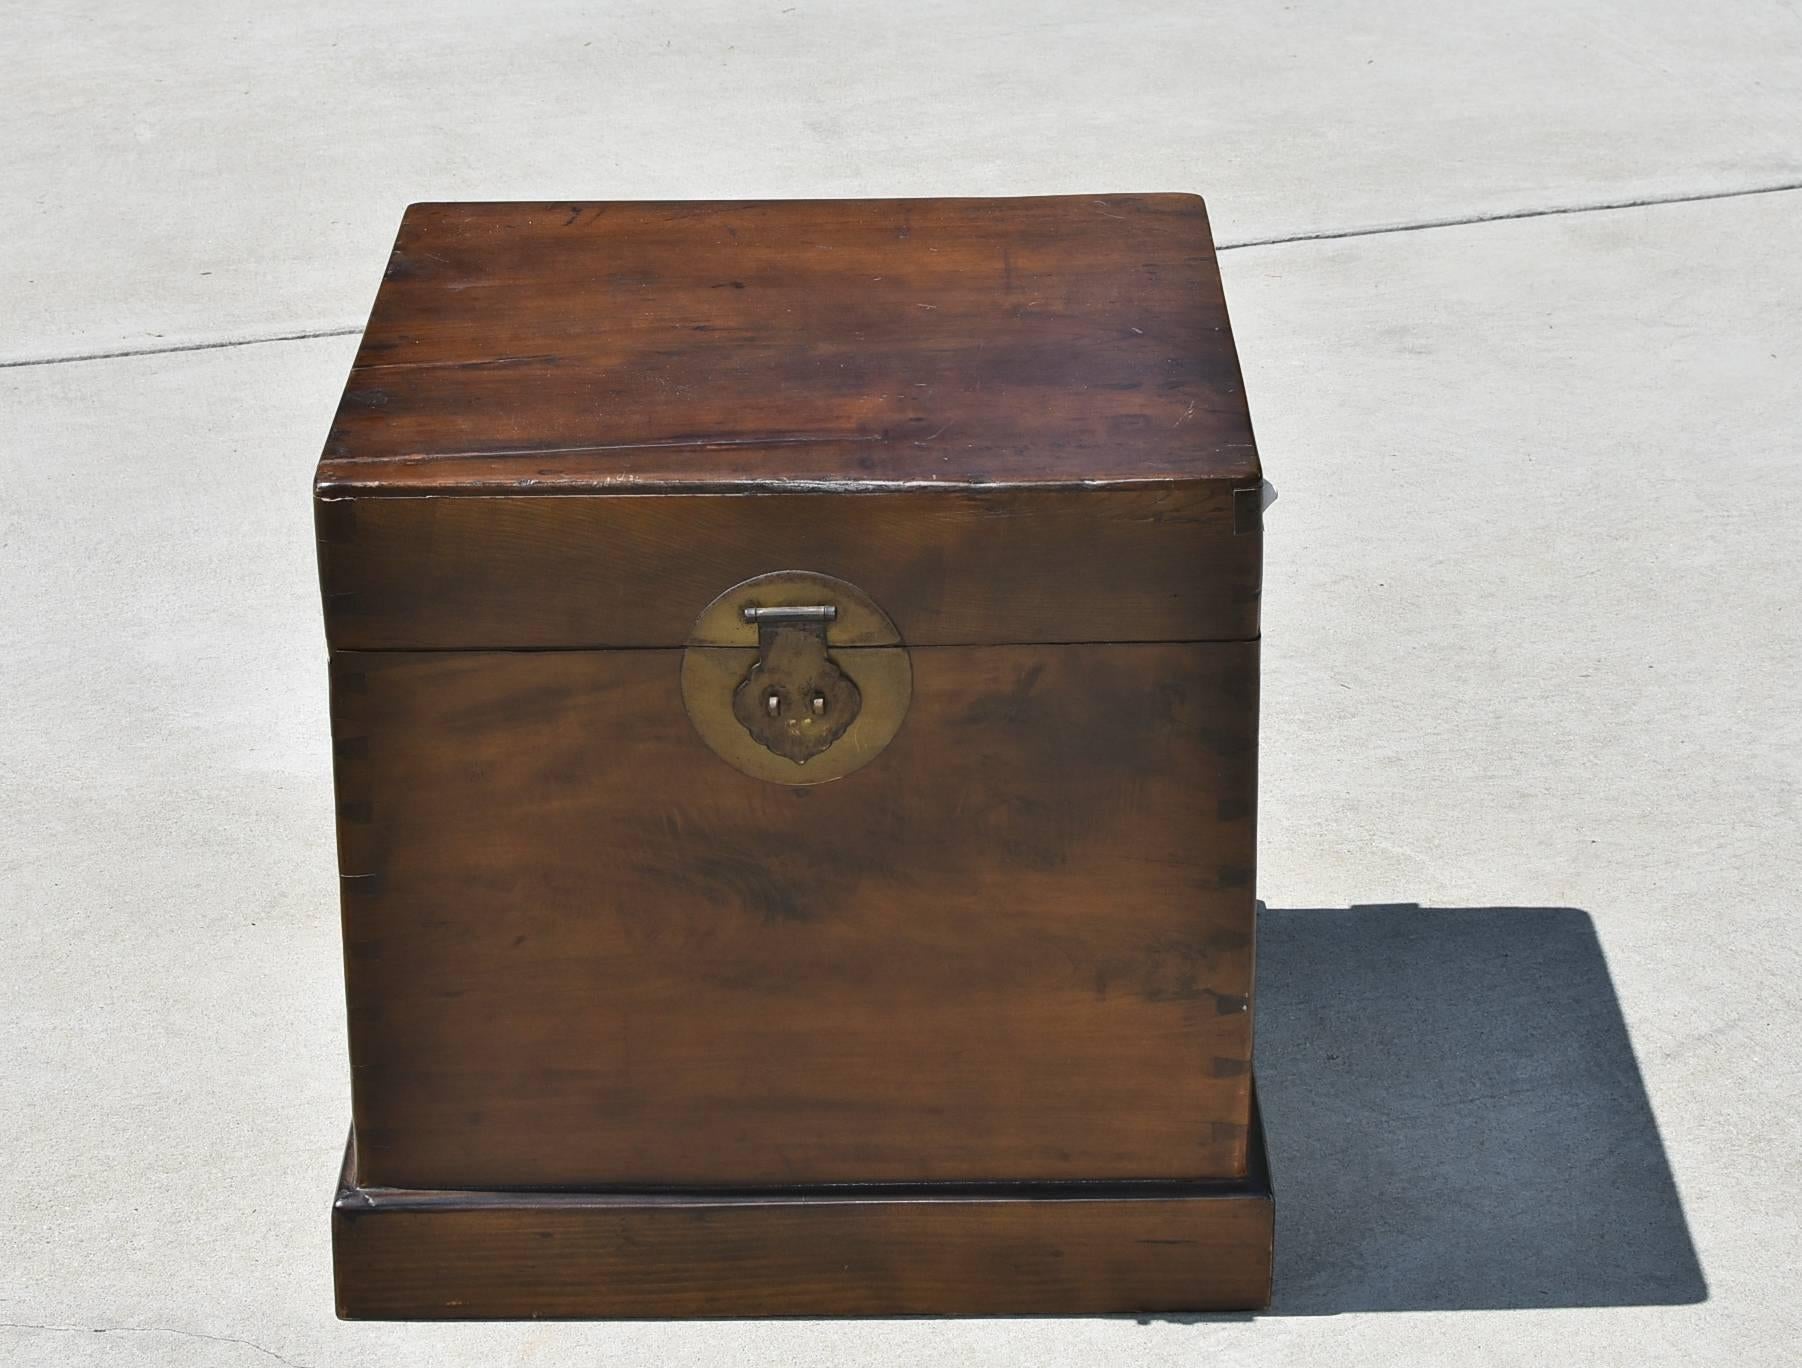 A beautiful 20th century Chinese trunk made of solid wood, using tenons, mortises and exquisite dovetails joinery. Solid brass hardware. Ming style. A wonderful piece to be used as a storage trunk or a table.

 